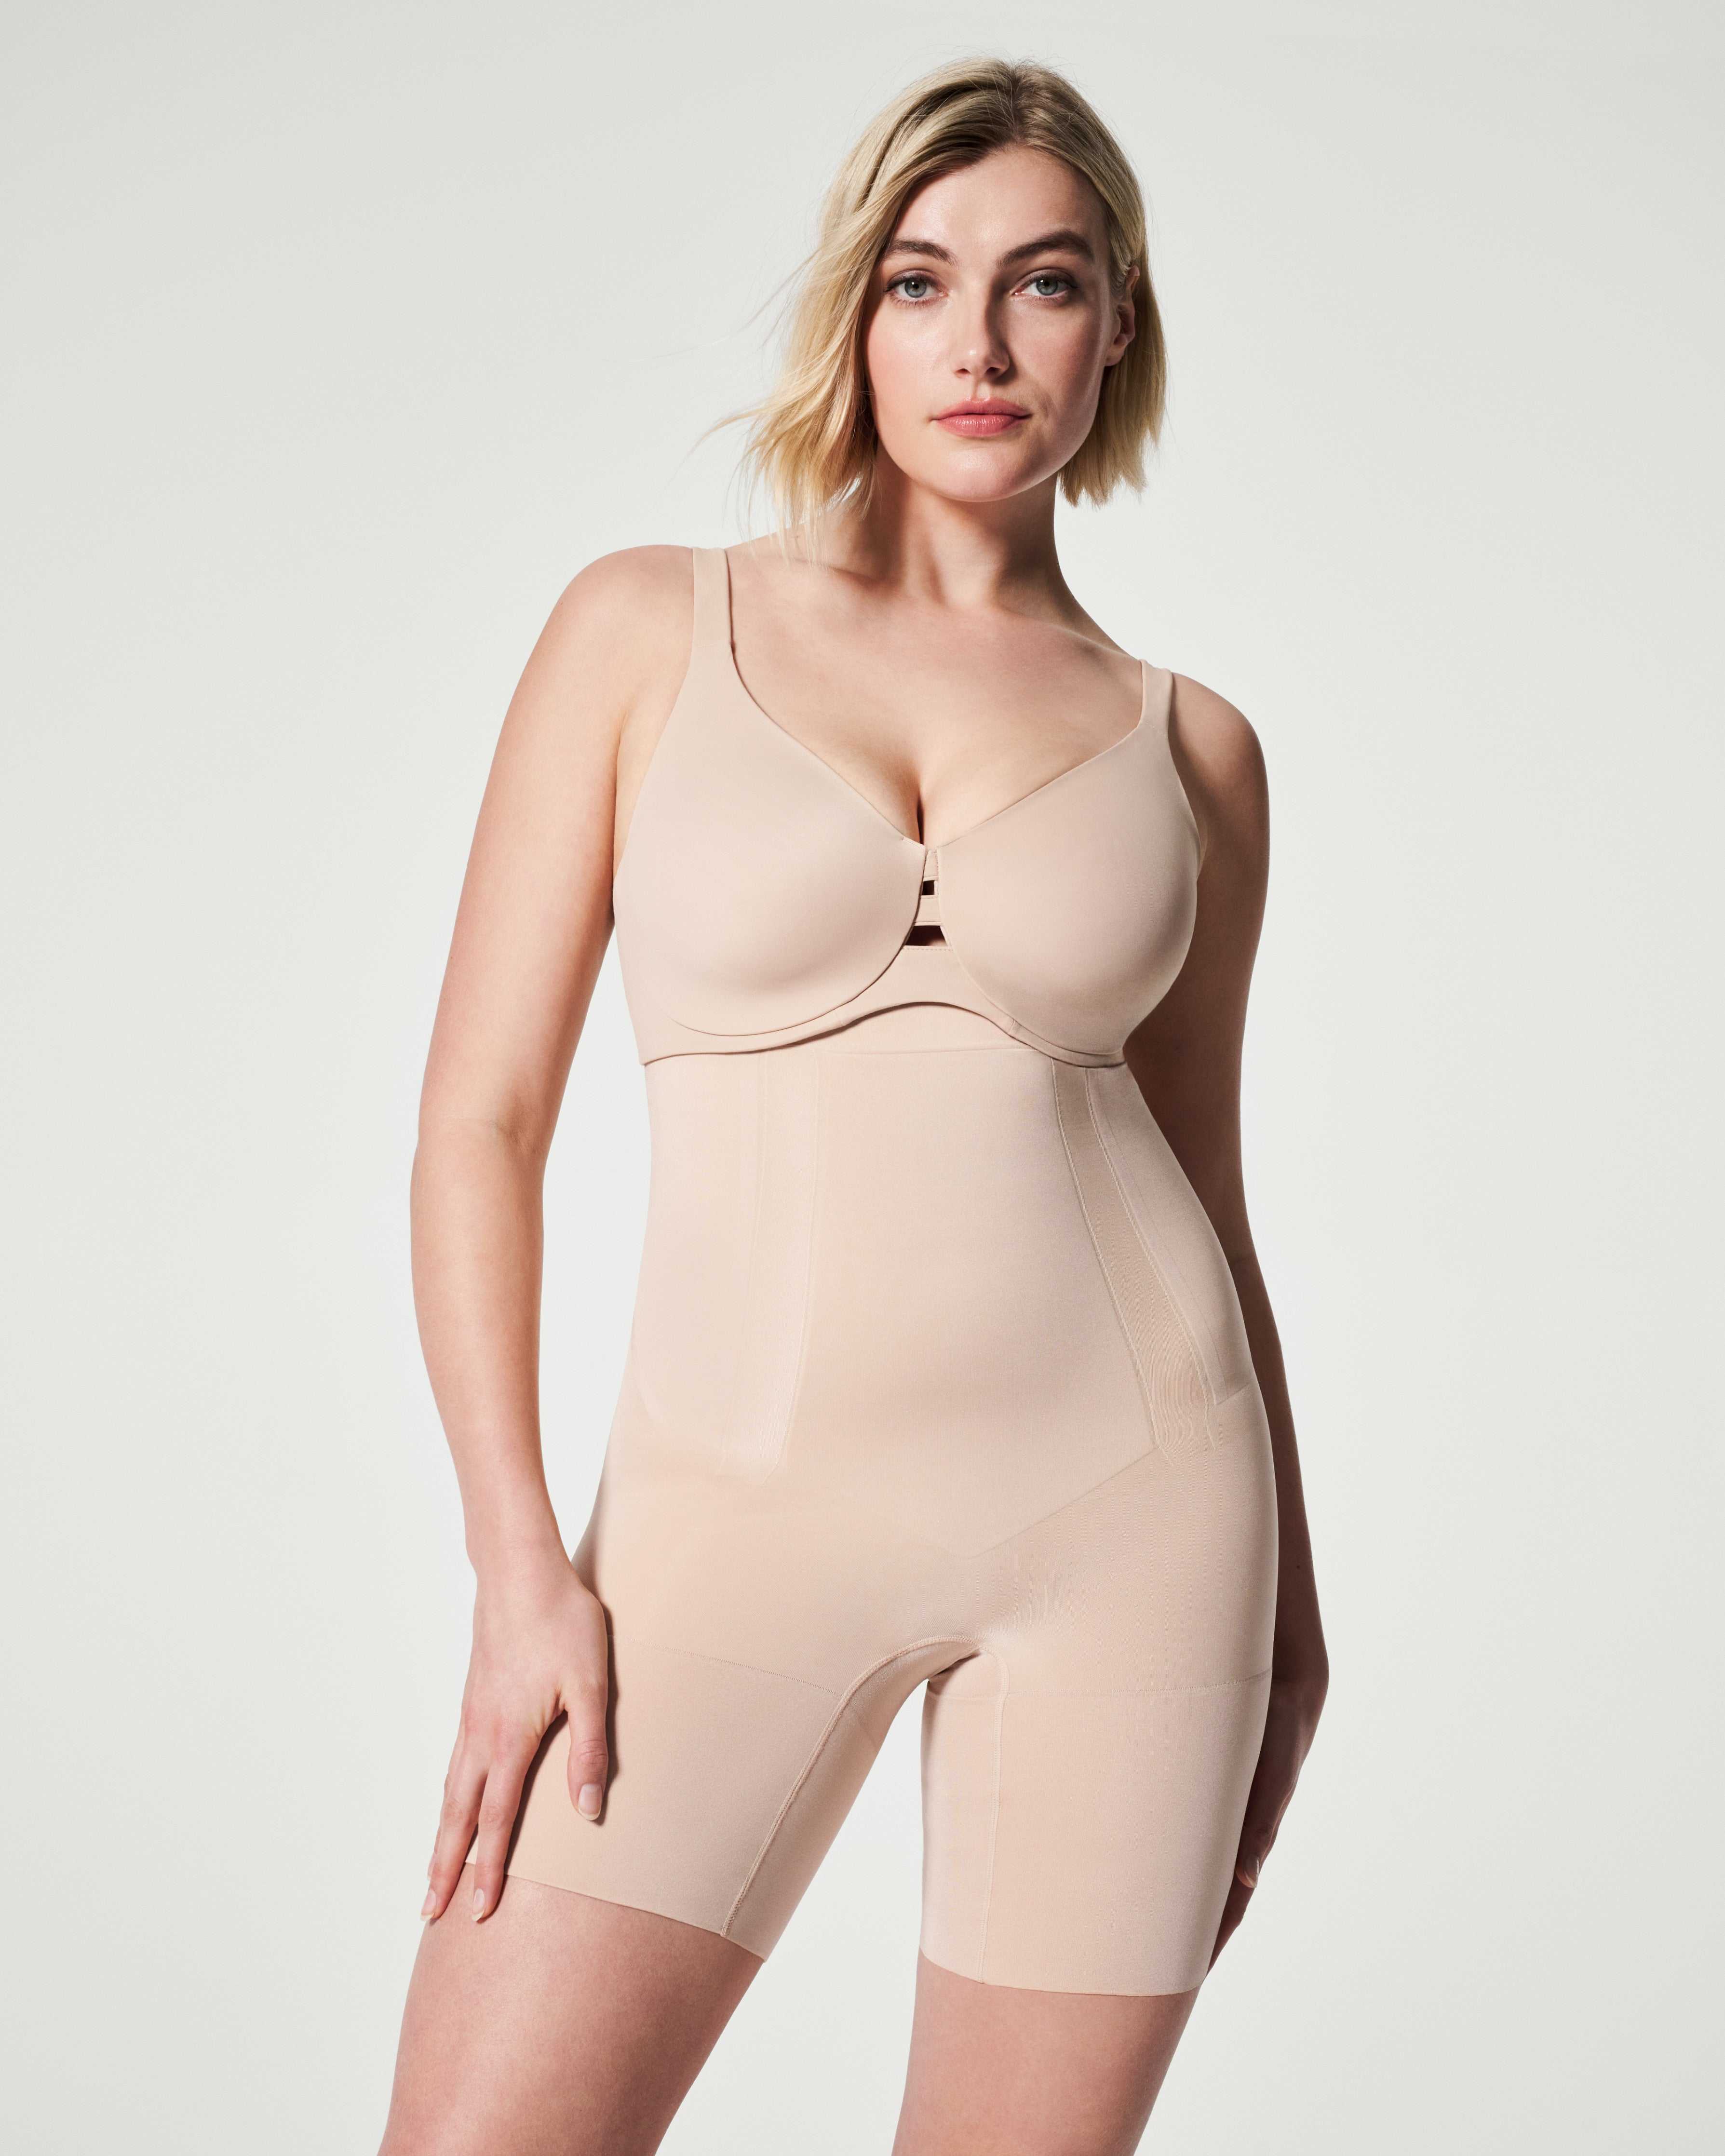 Best Shapewear for Women, According to a Tailor